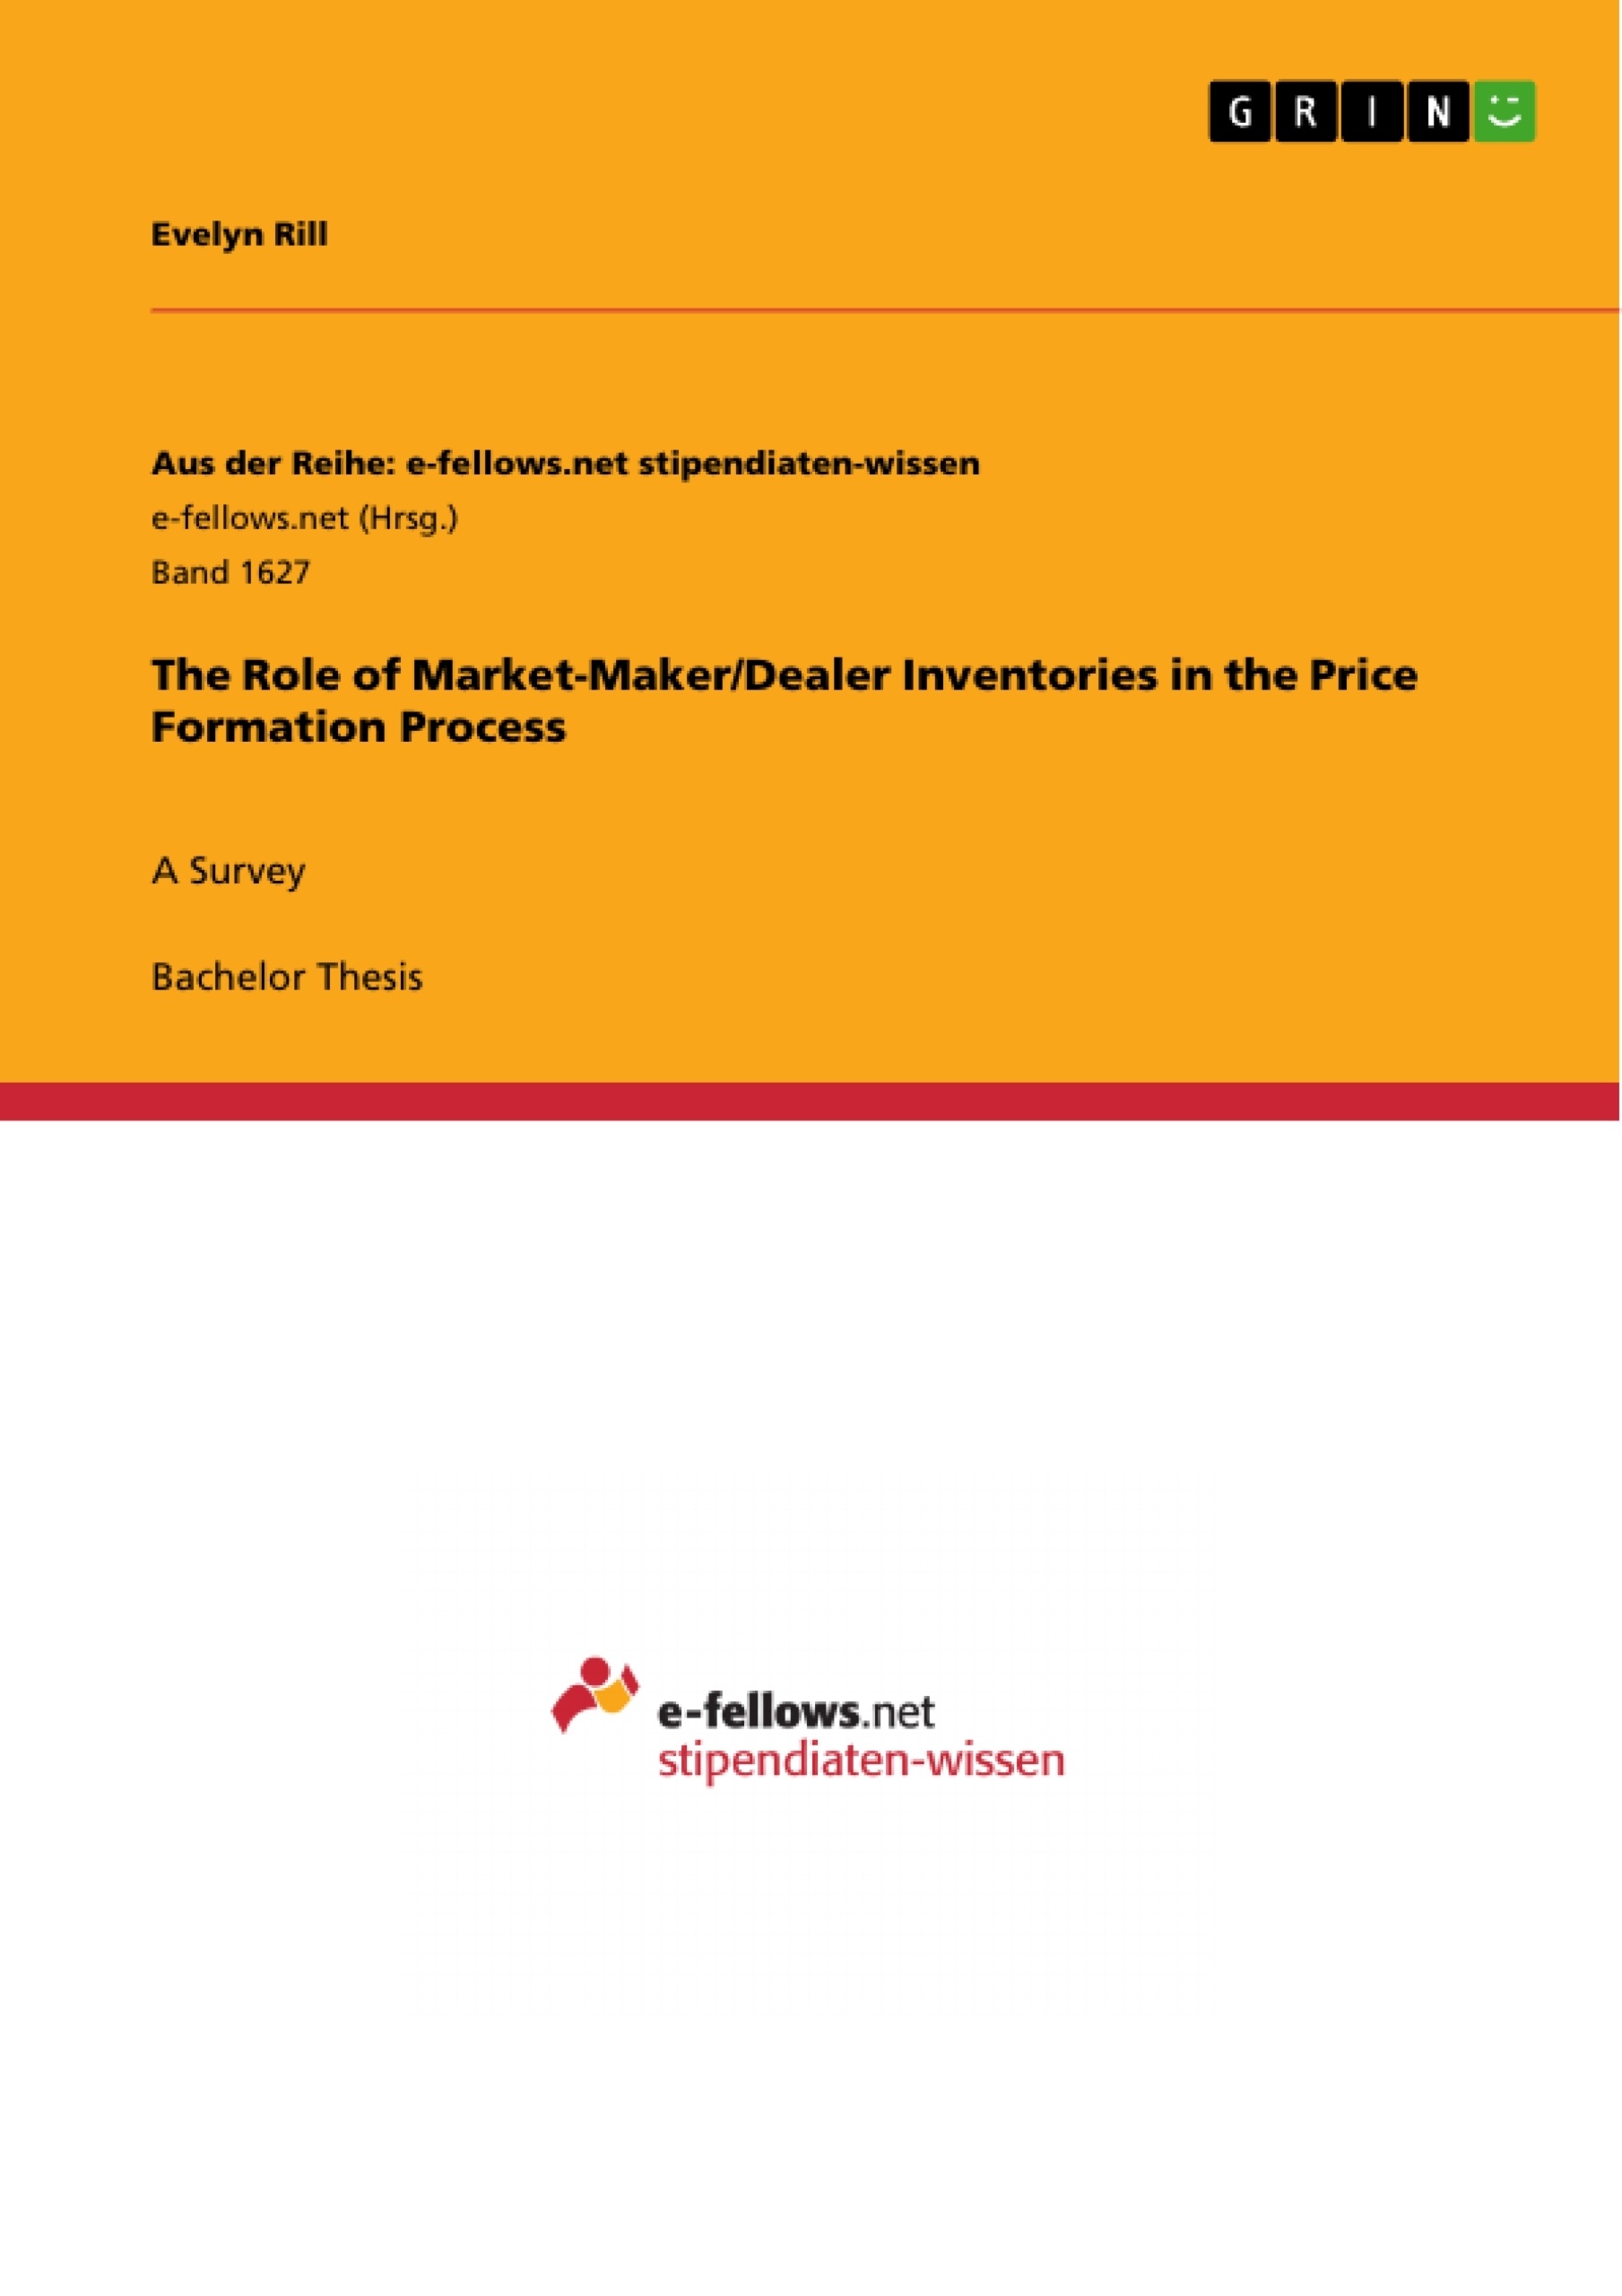 Title: The Role of Market-Maker/Dealer Inventories in the Price Formation Process